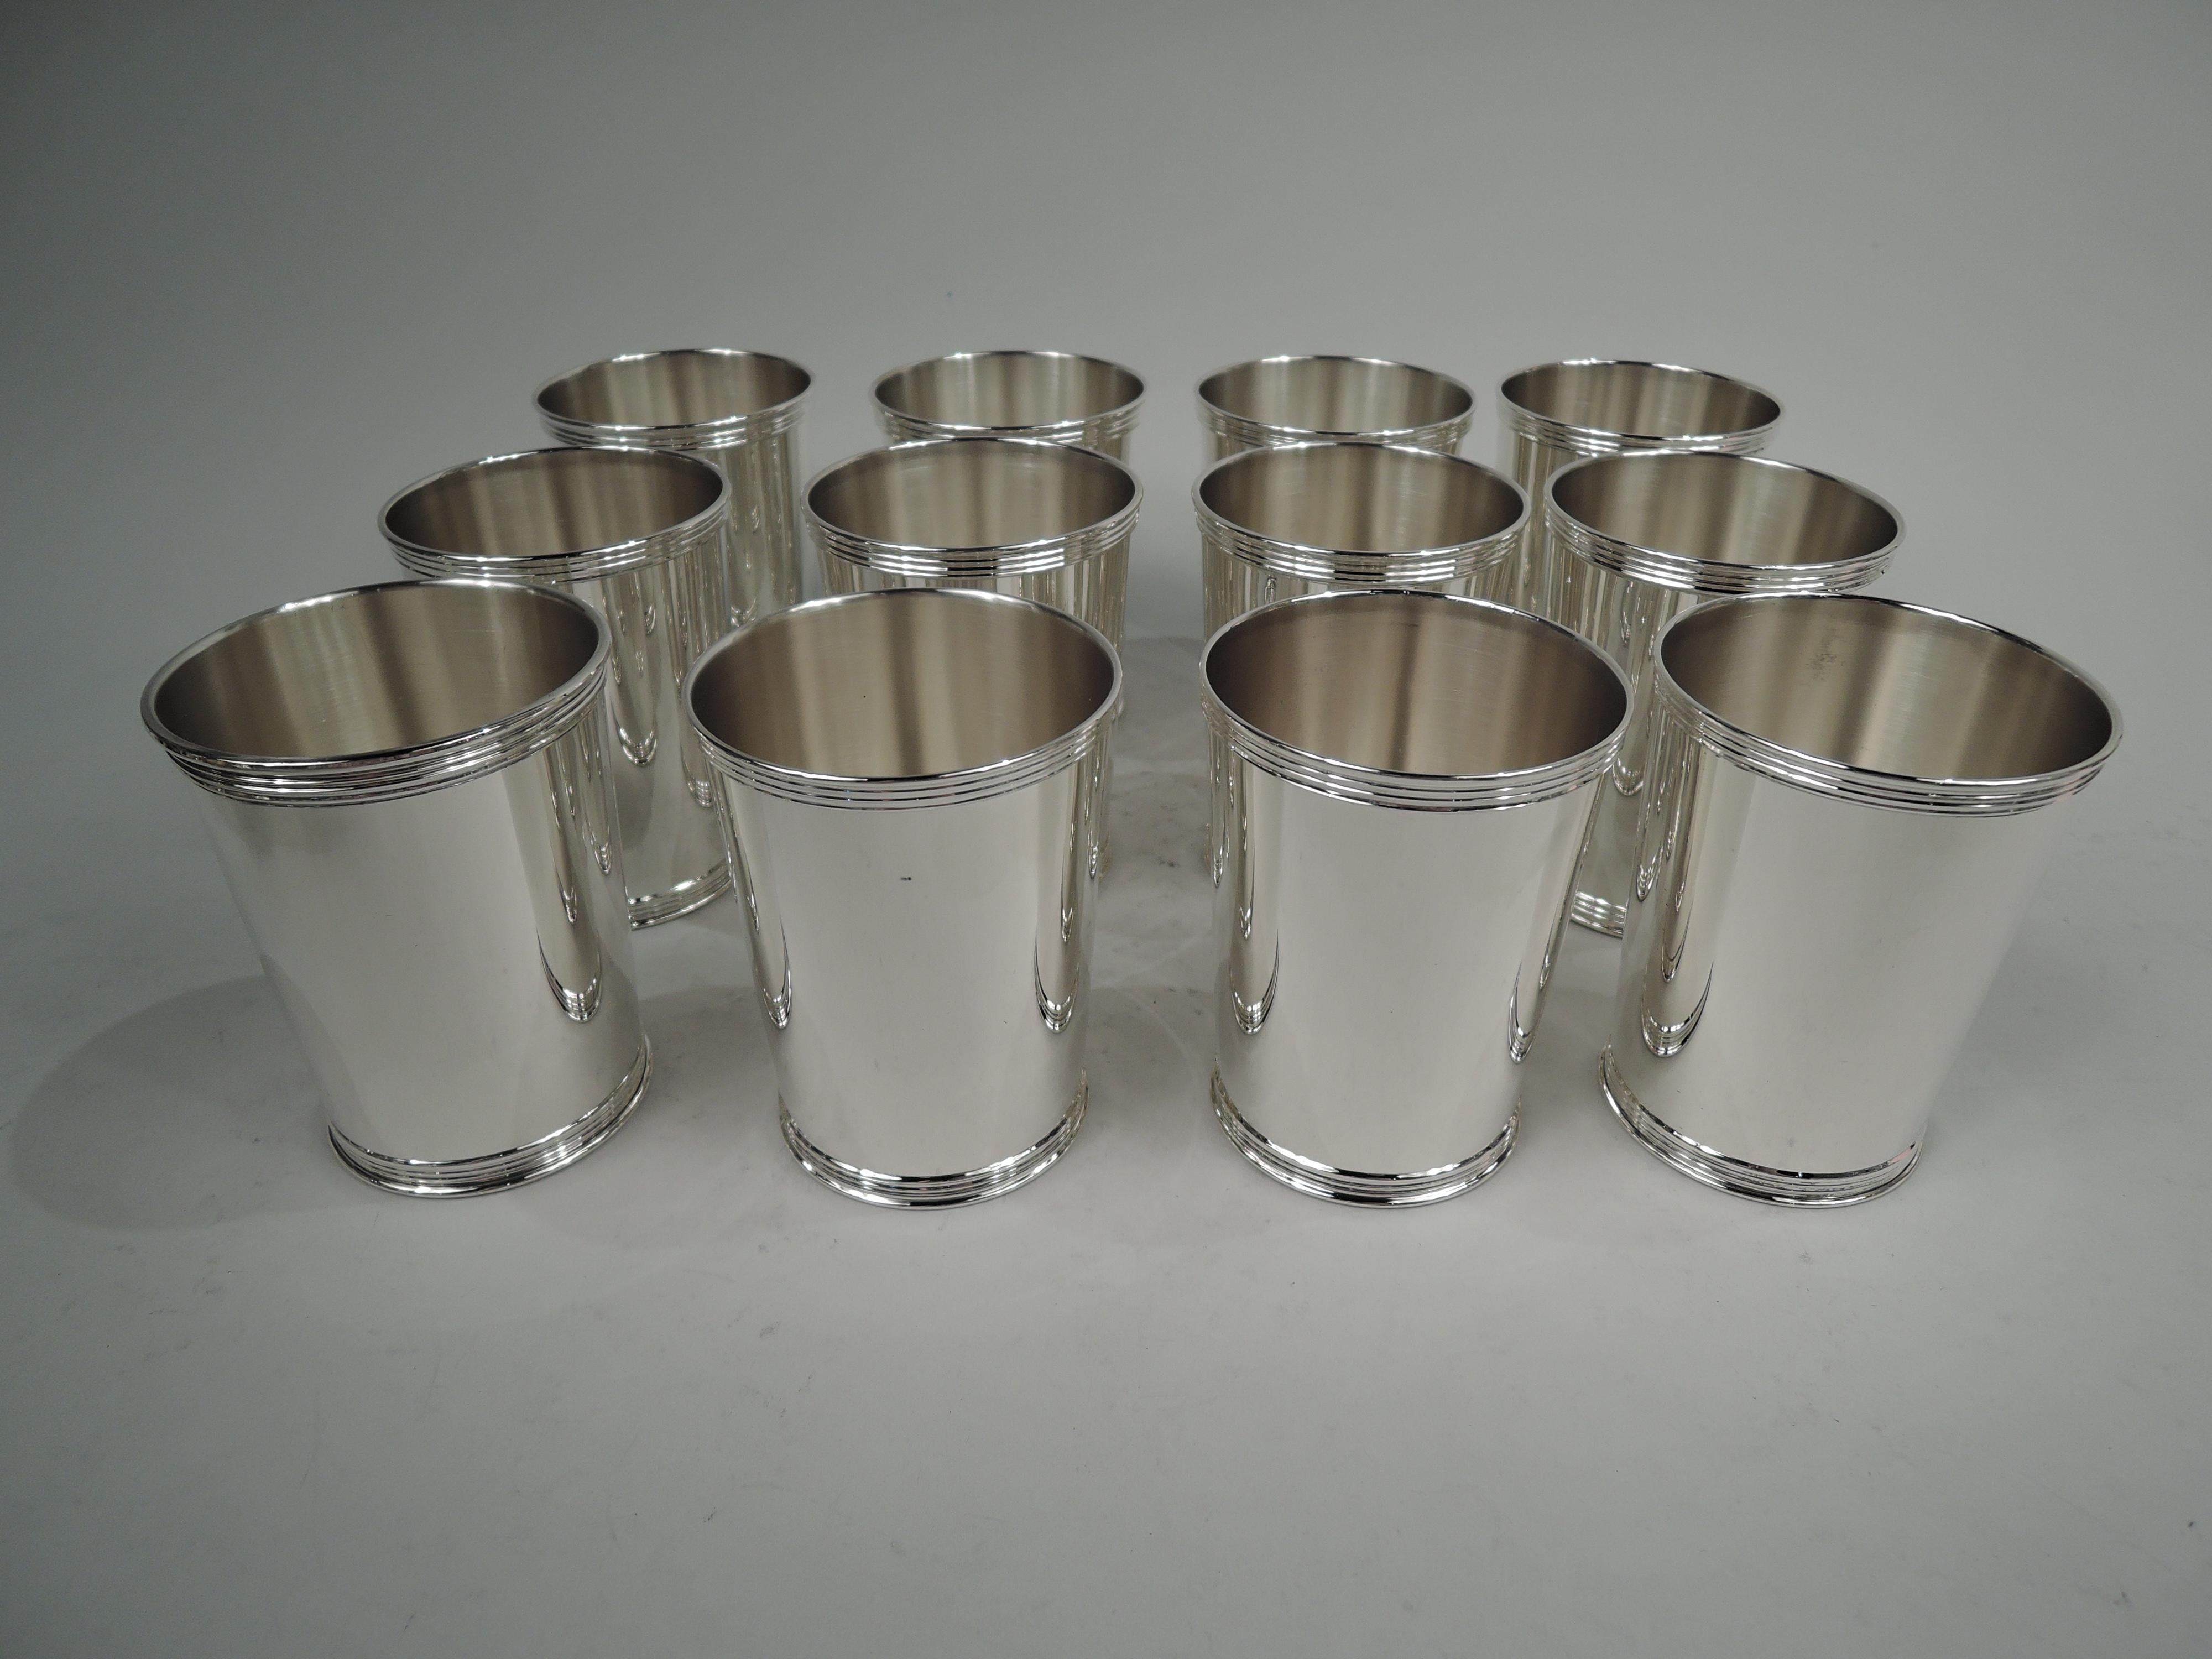 Twelve traditional sterling silver mint juleps. Made by Manchester in Providence. Each: Straight and tapering sides and reeded rim and foot. A big set guaranteed to give your next part lots of go. Fully marked including maker’s stamp and no. 3759.